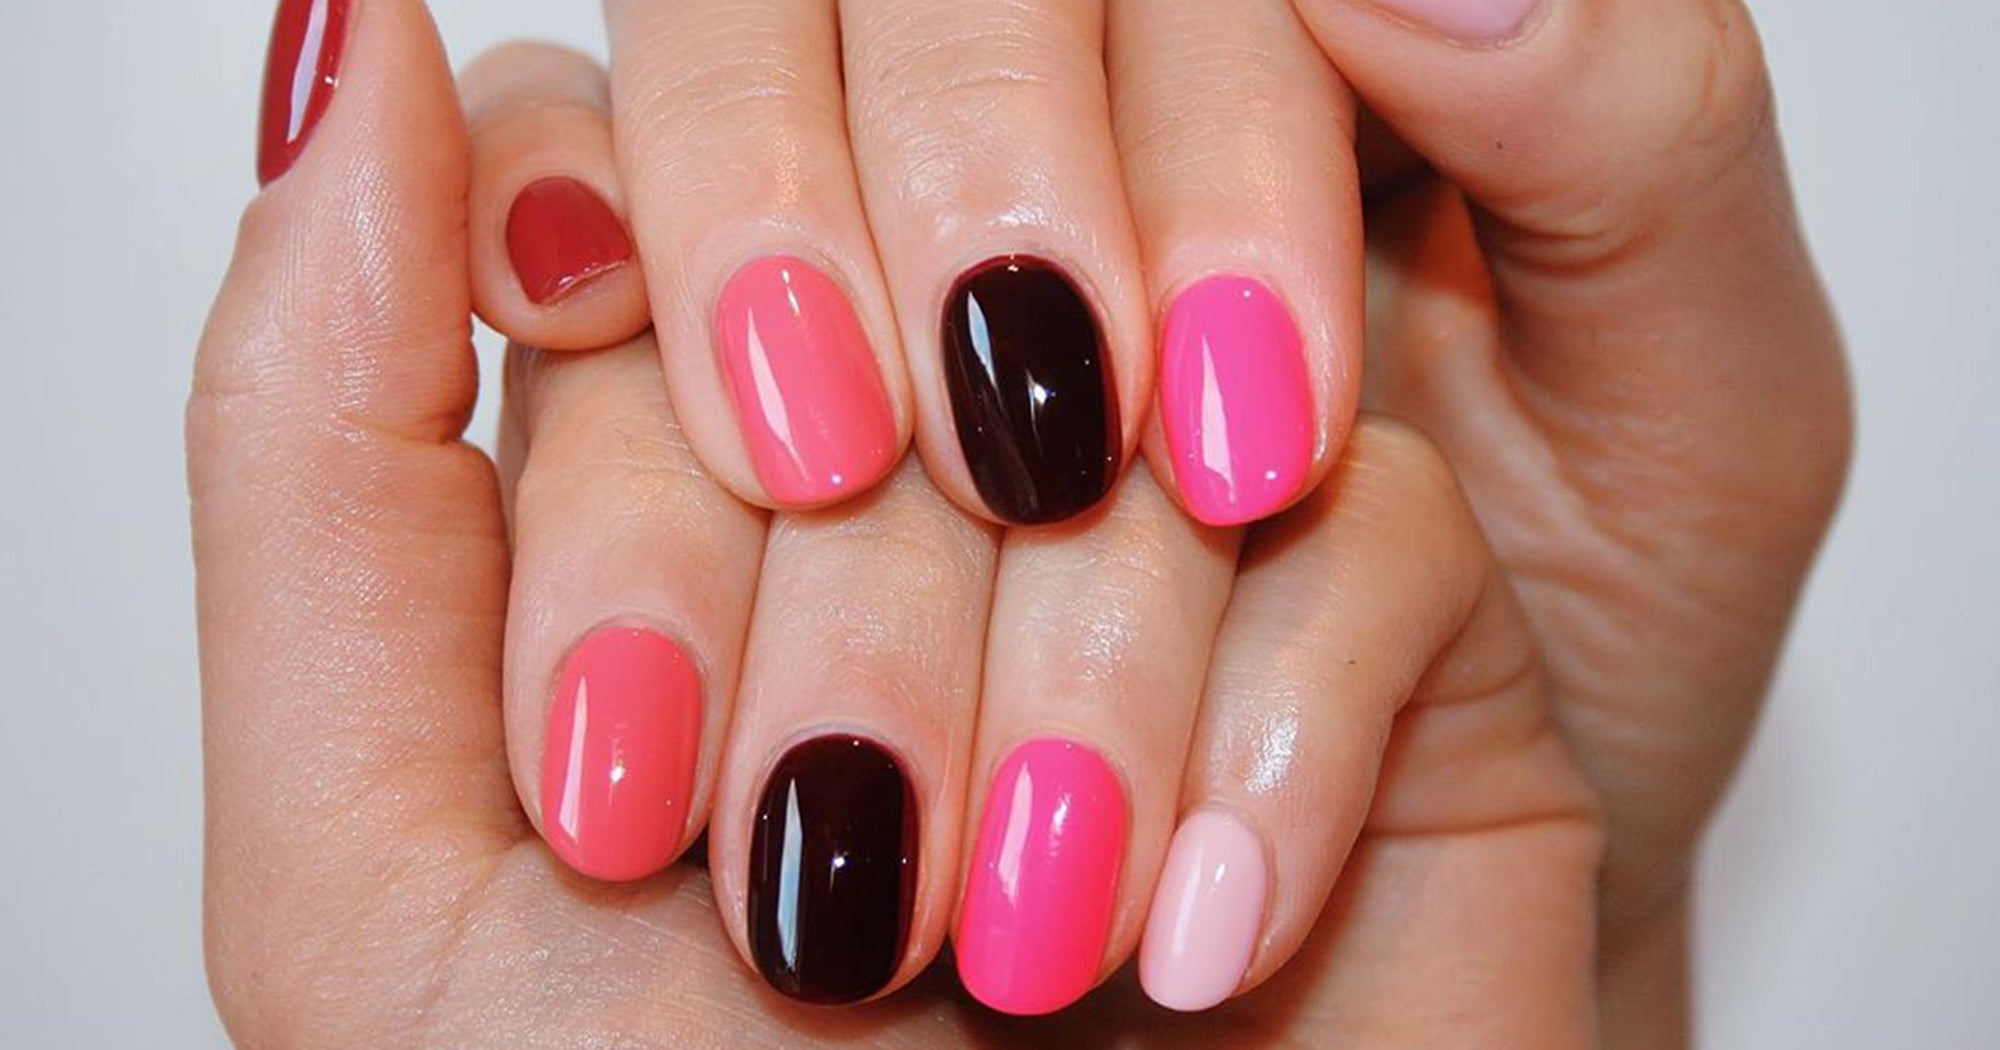 Find 86+ Mesmerizing Simple Bold Nail Design Unlock Your Hair's Full Potential